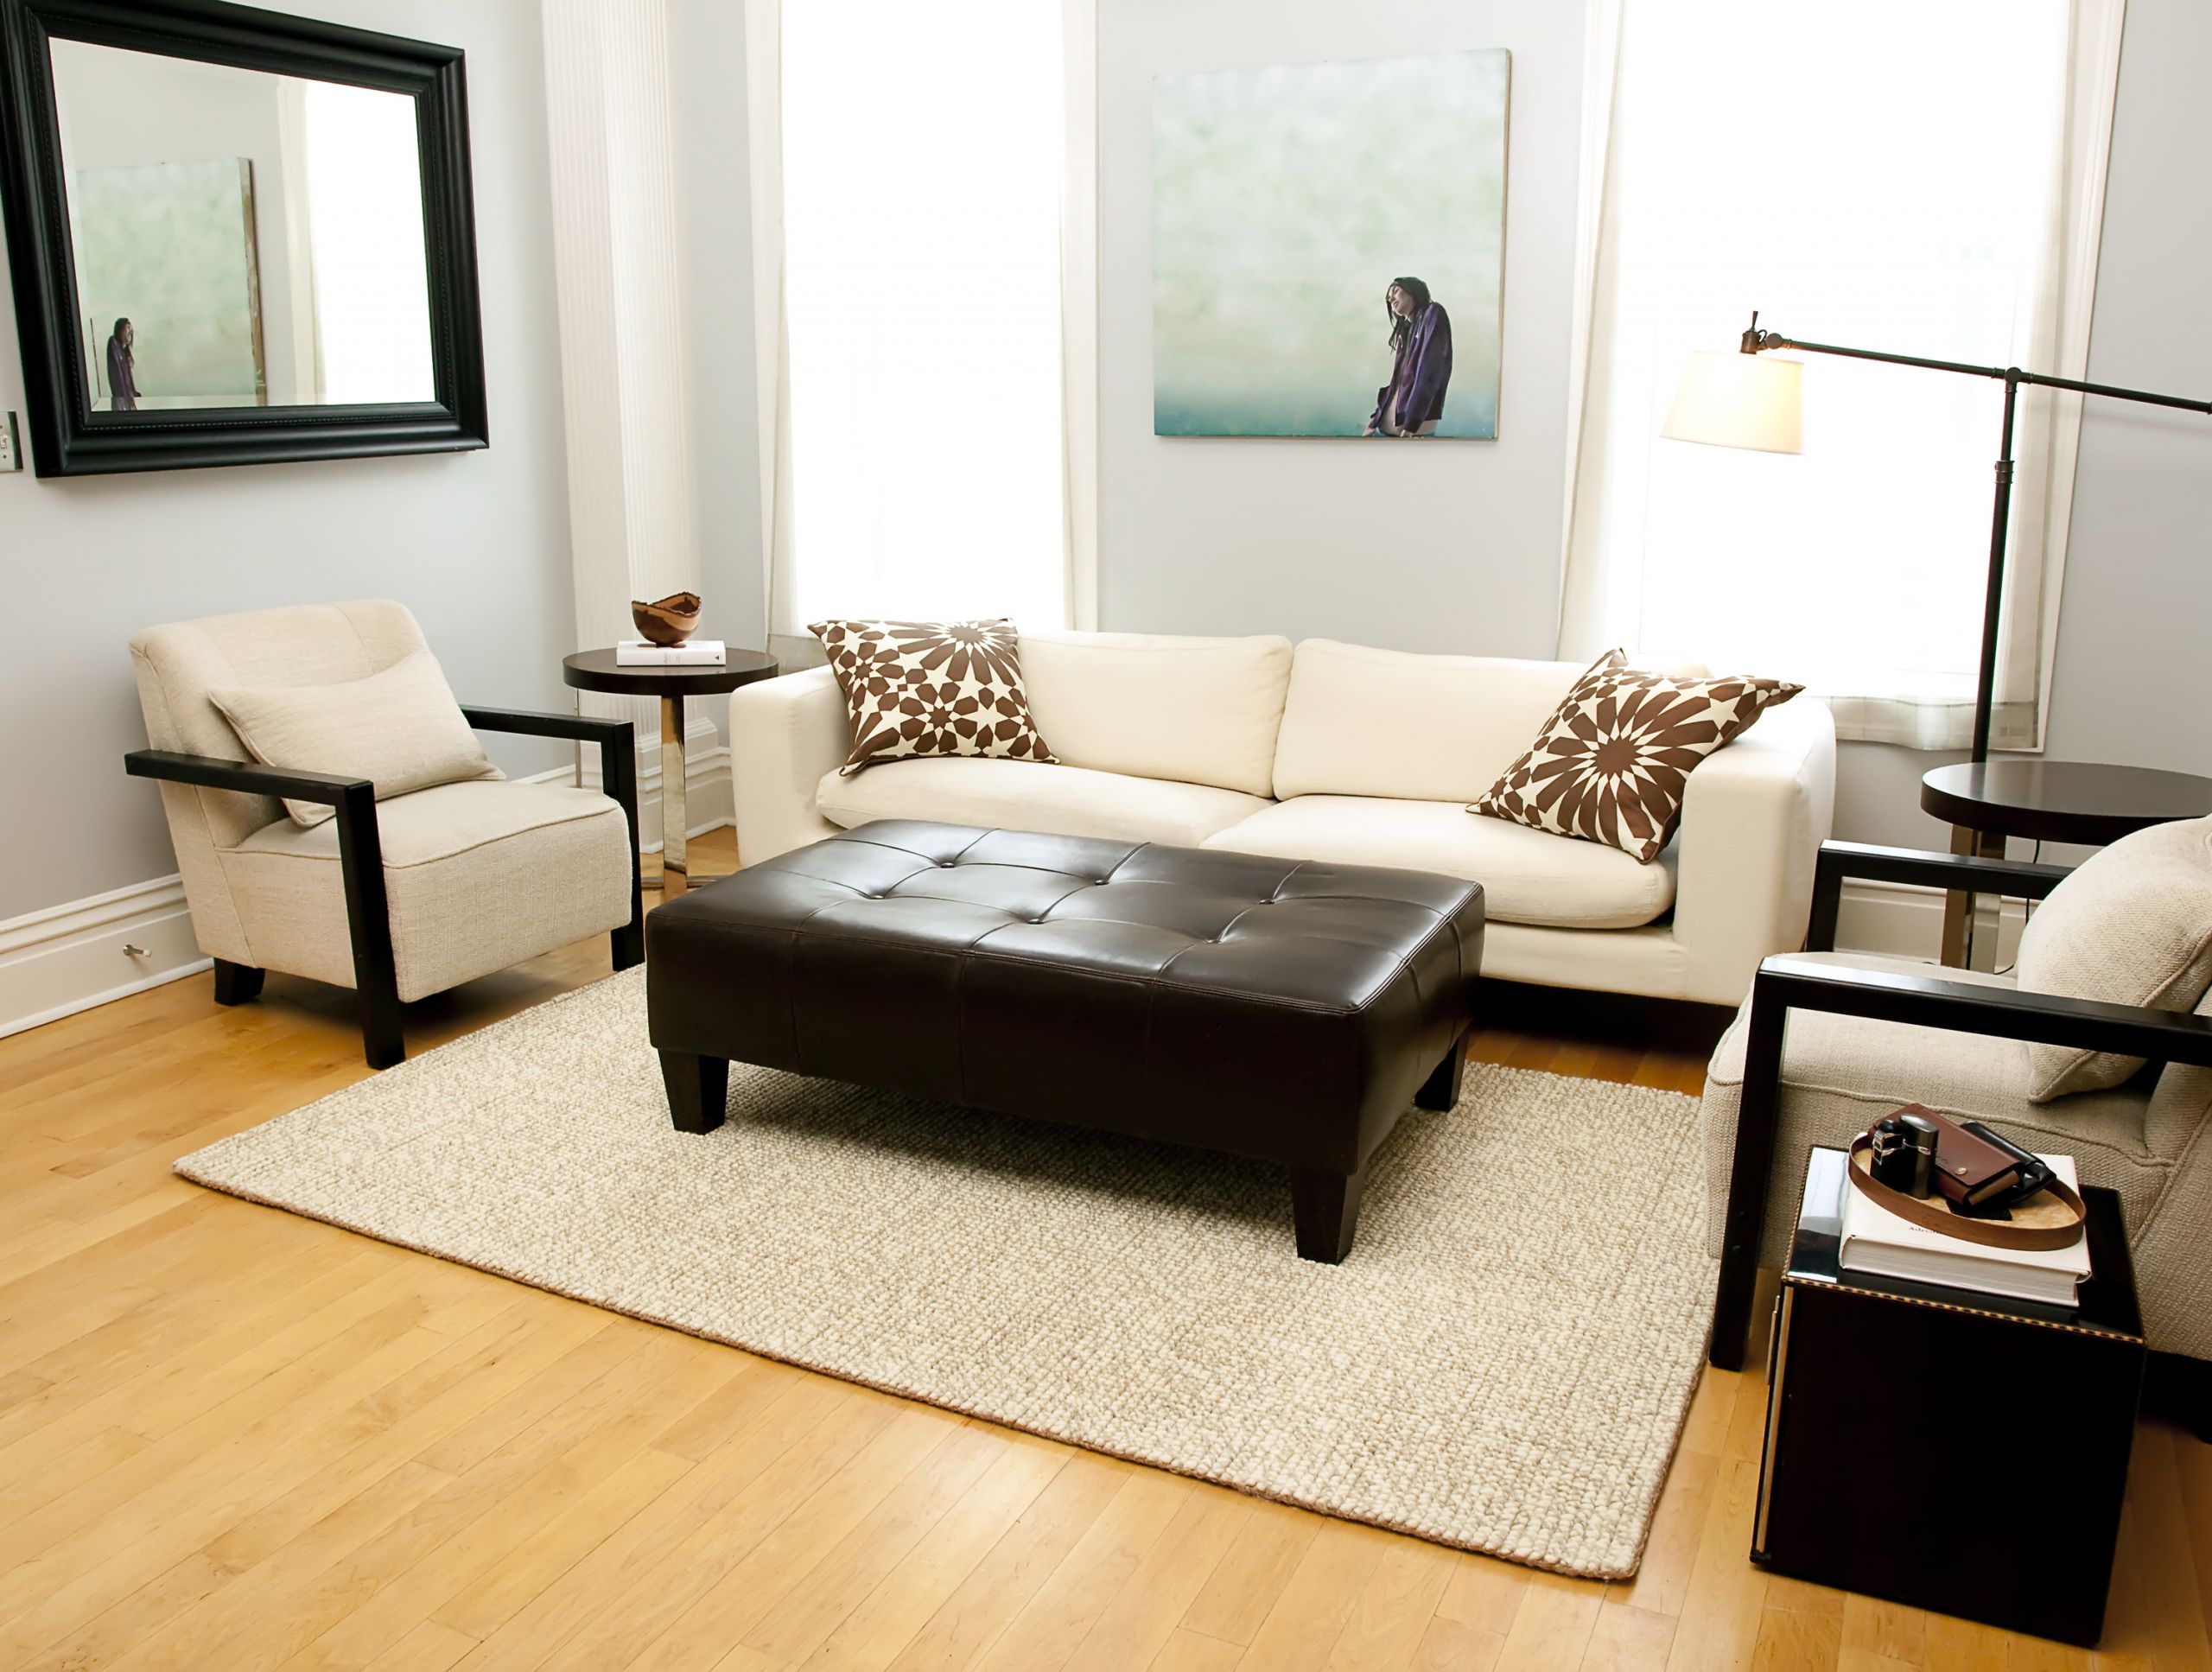 Jute Rug Living Room
 What Is Jute And Why Does It Make Such Great Area Rugs